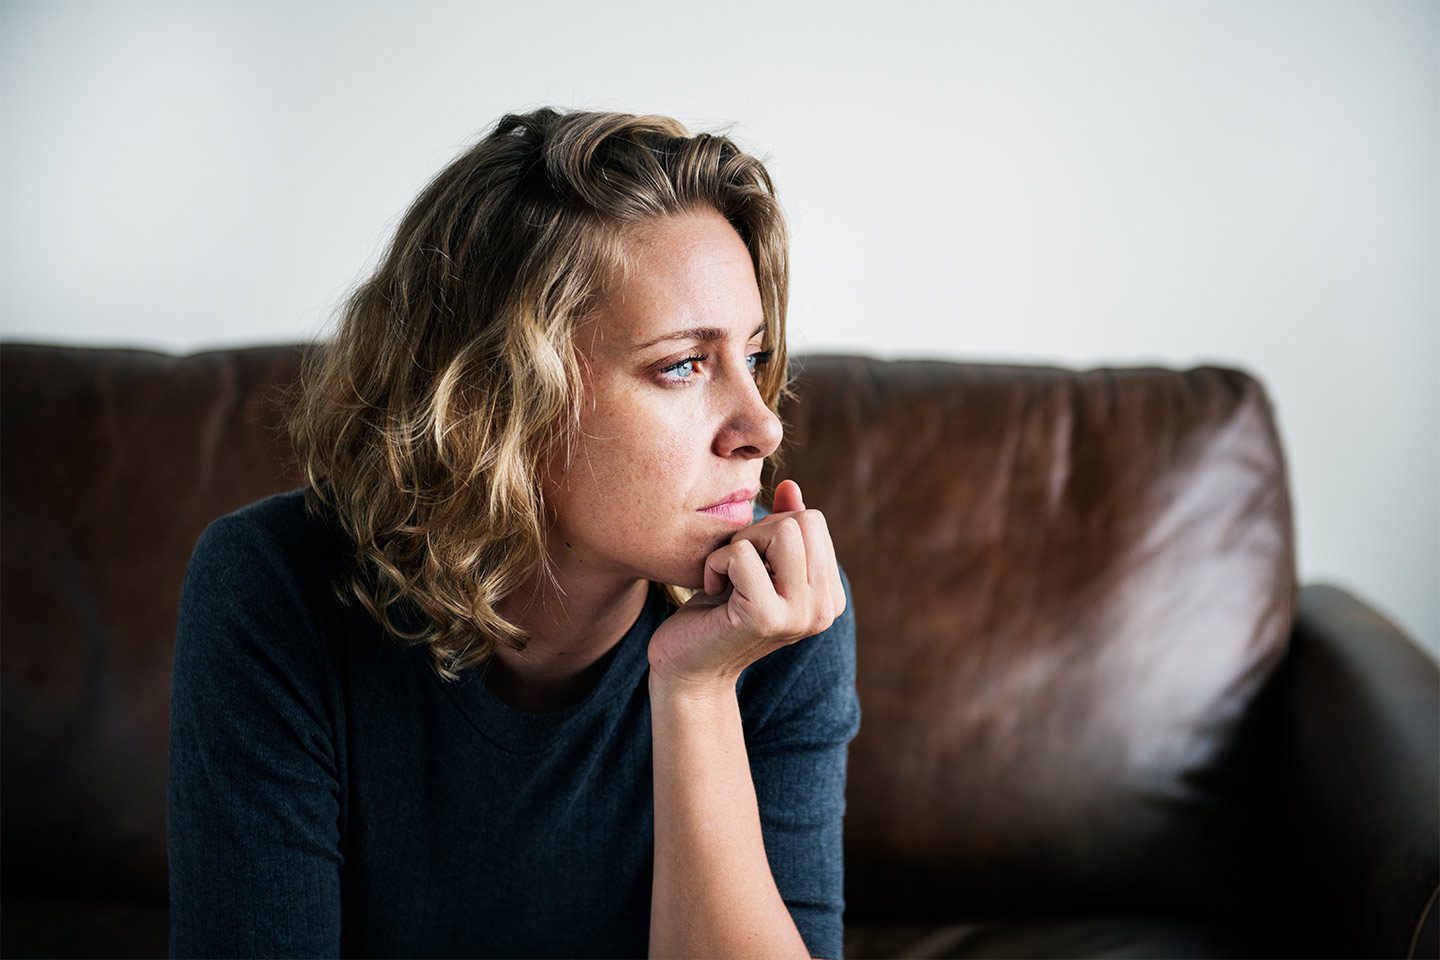 Woman sitting on couch looking anxious and depressed